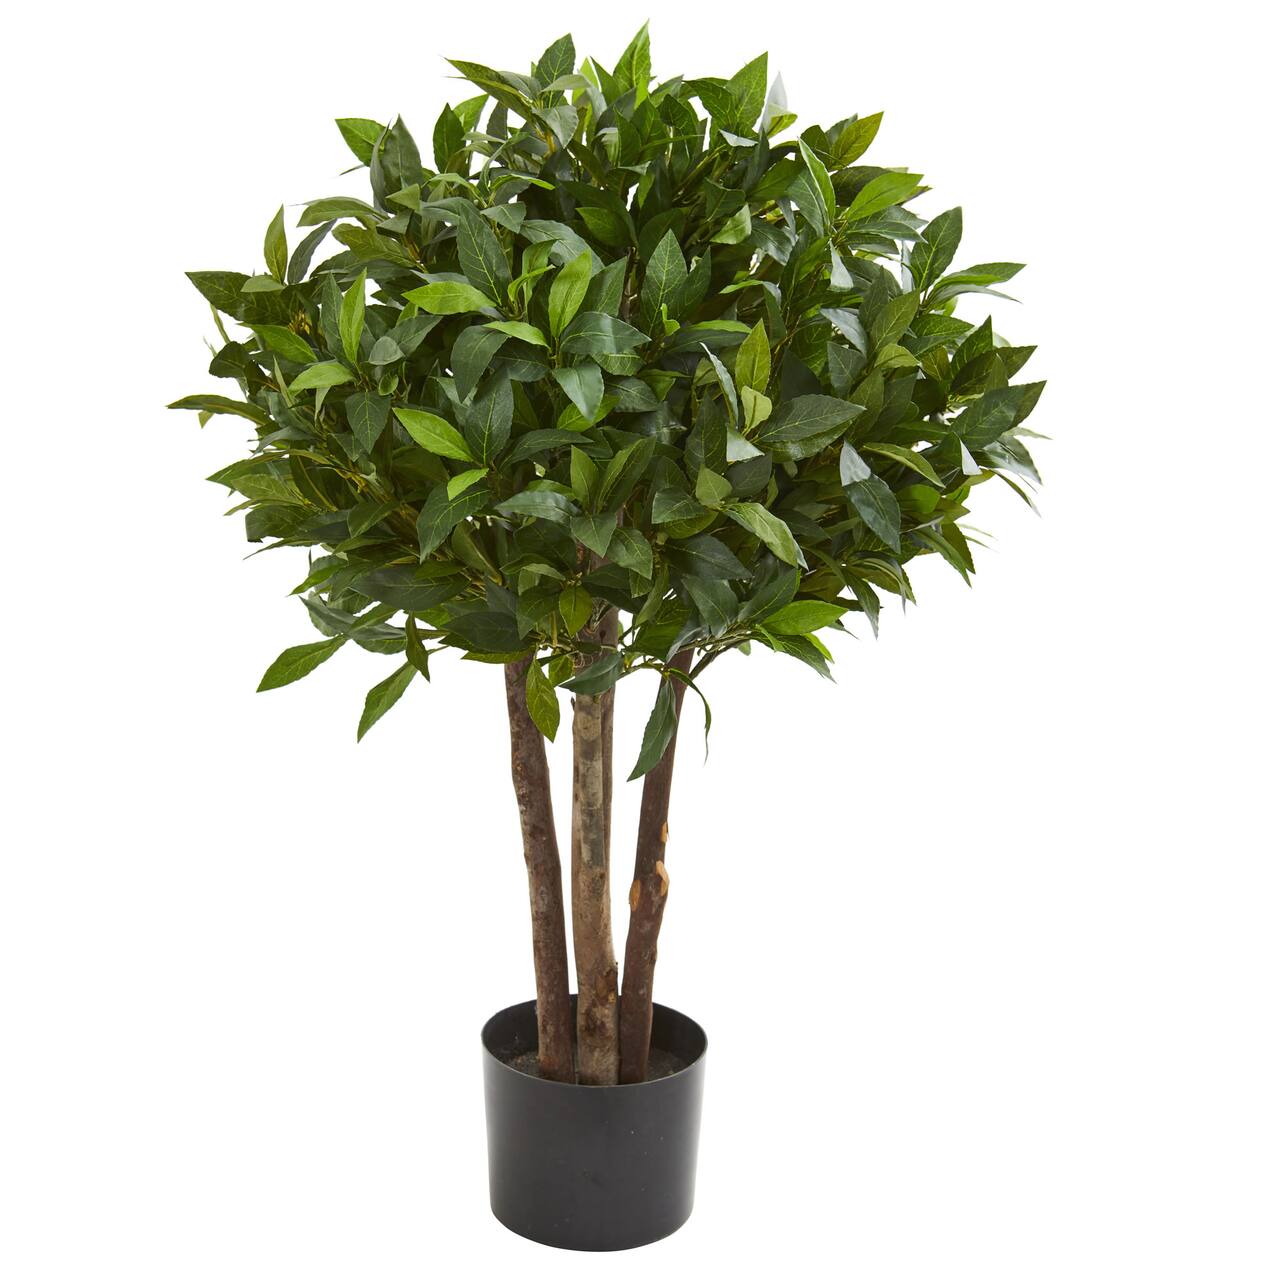 3ft. Potted Bay Leaf Topiary Tree